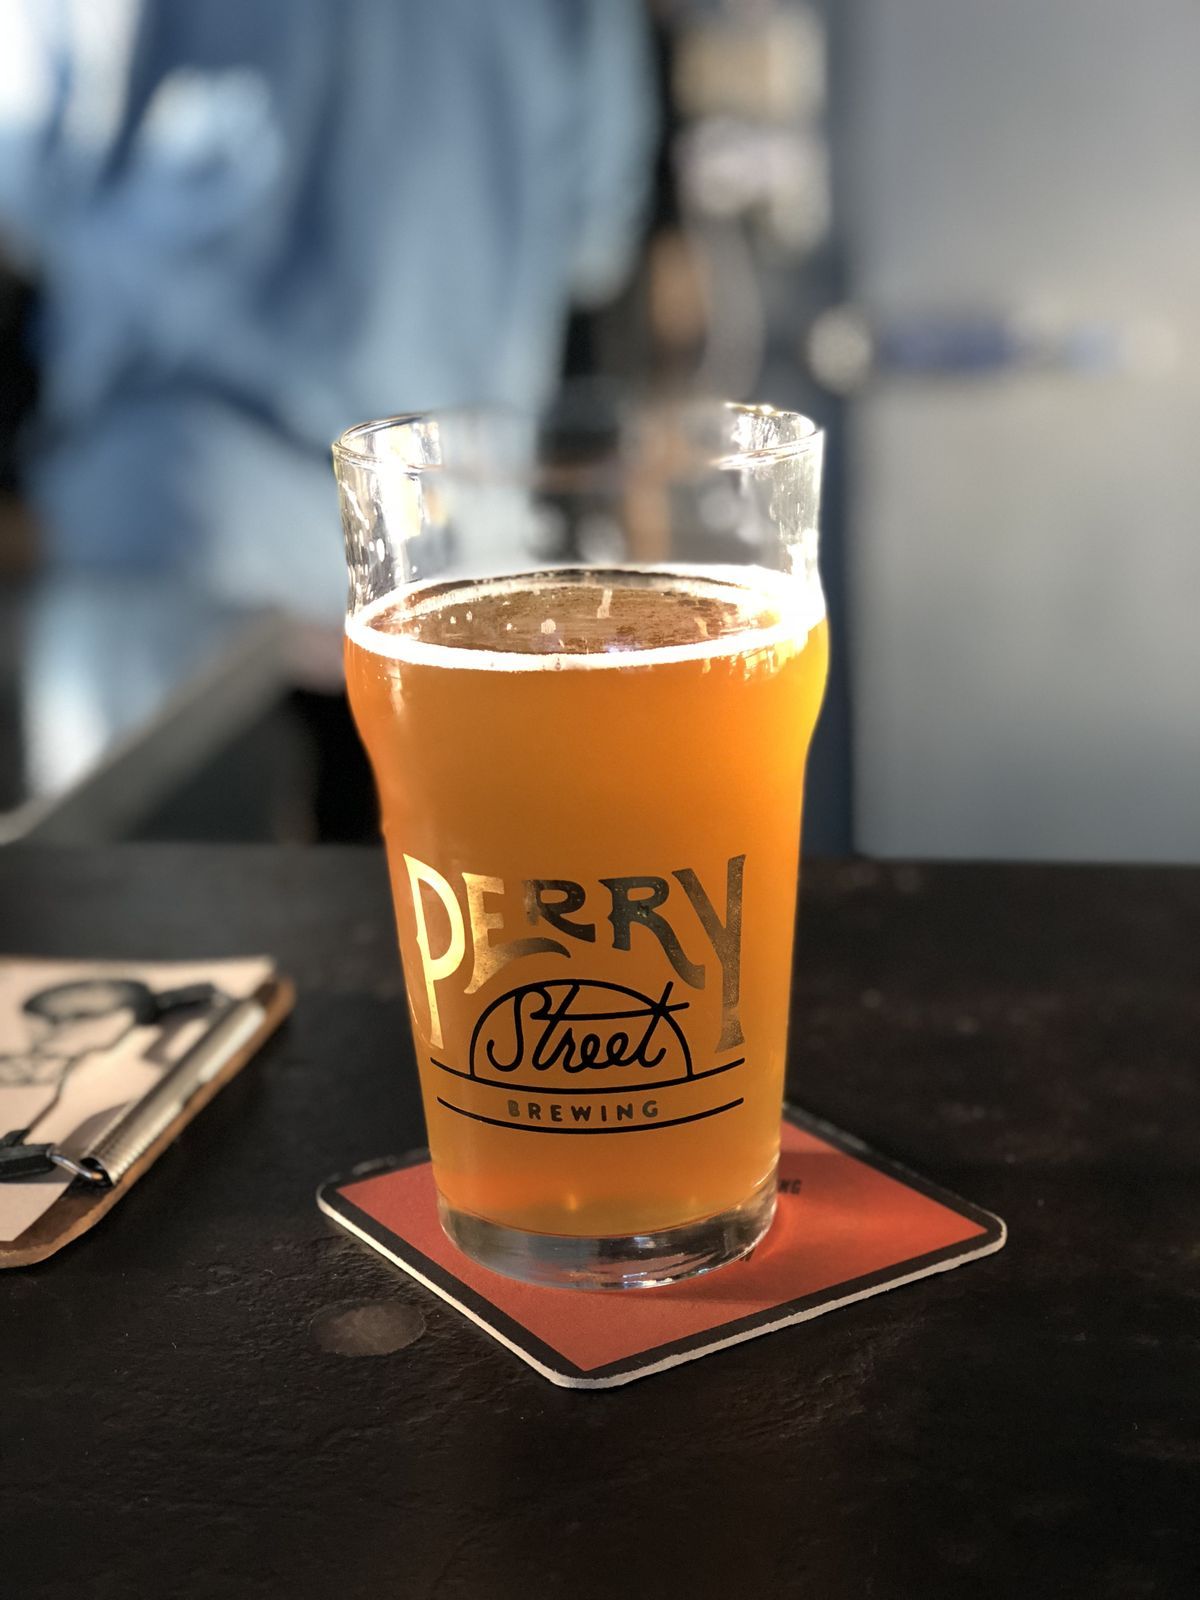 Perry Street Brewing won a prestigious gold medal at the 2020 Great American Beer Festival.  (Greg Wildermuth/For The Spokesman-Review)